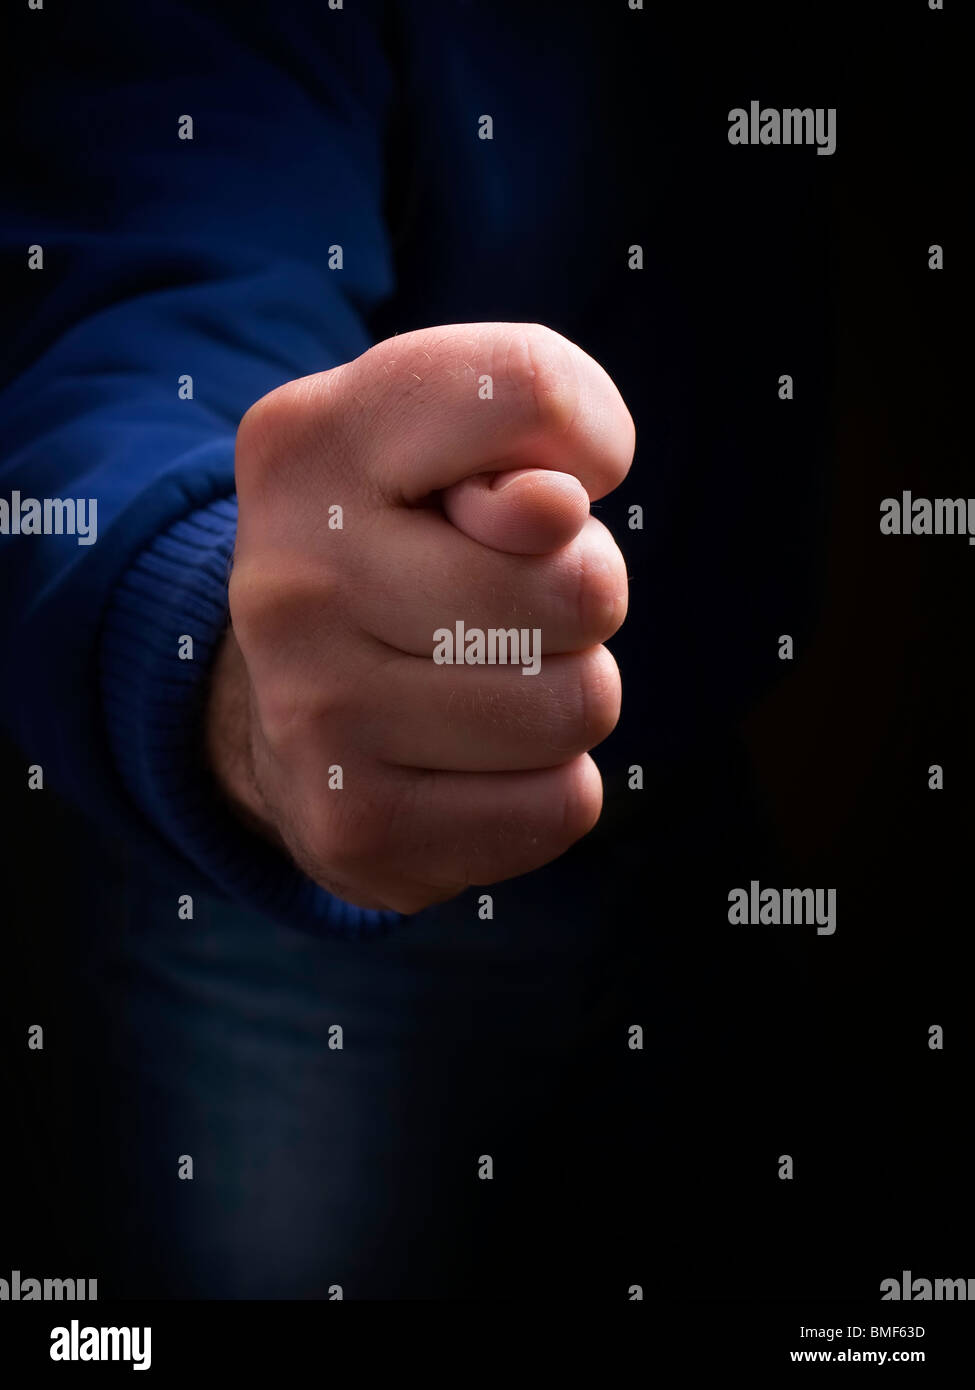 Gesture as cross fingers on a dark background. Stock Photo